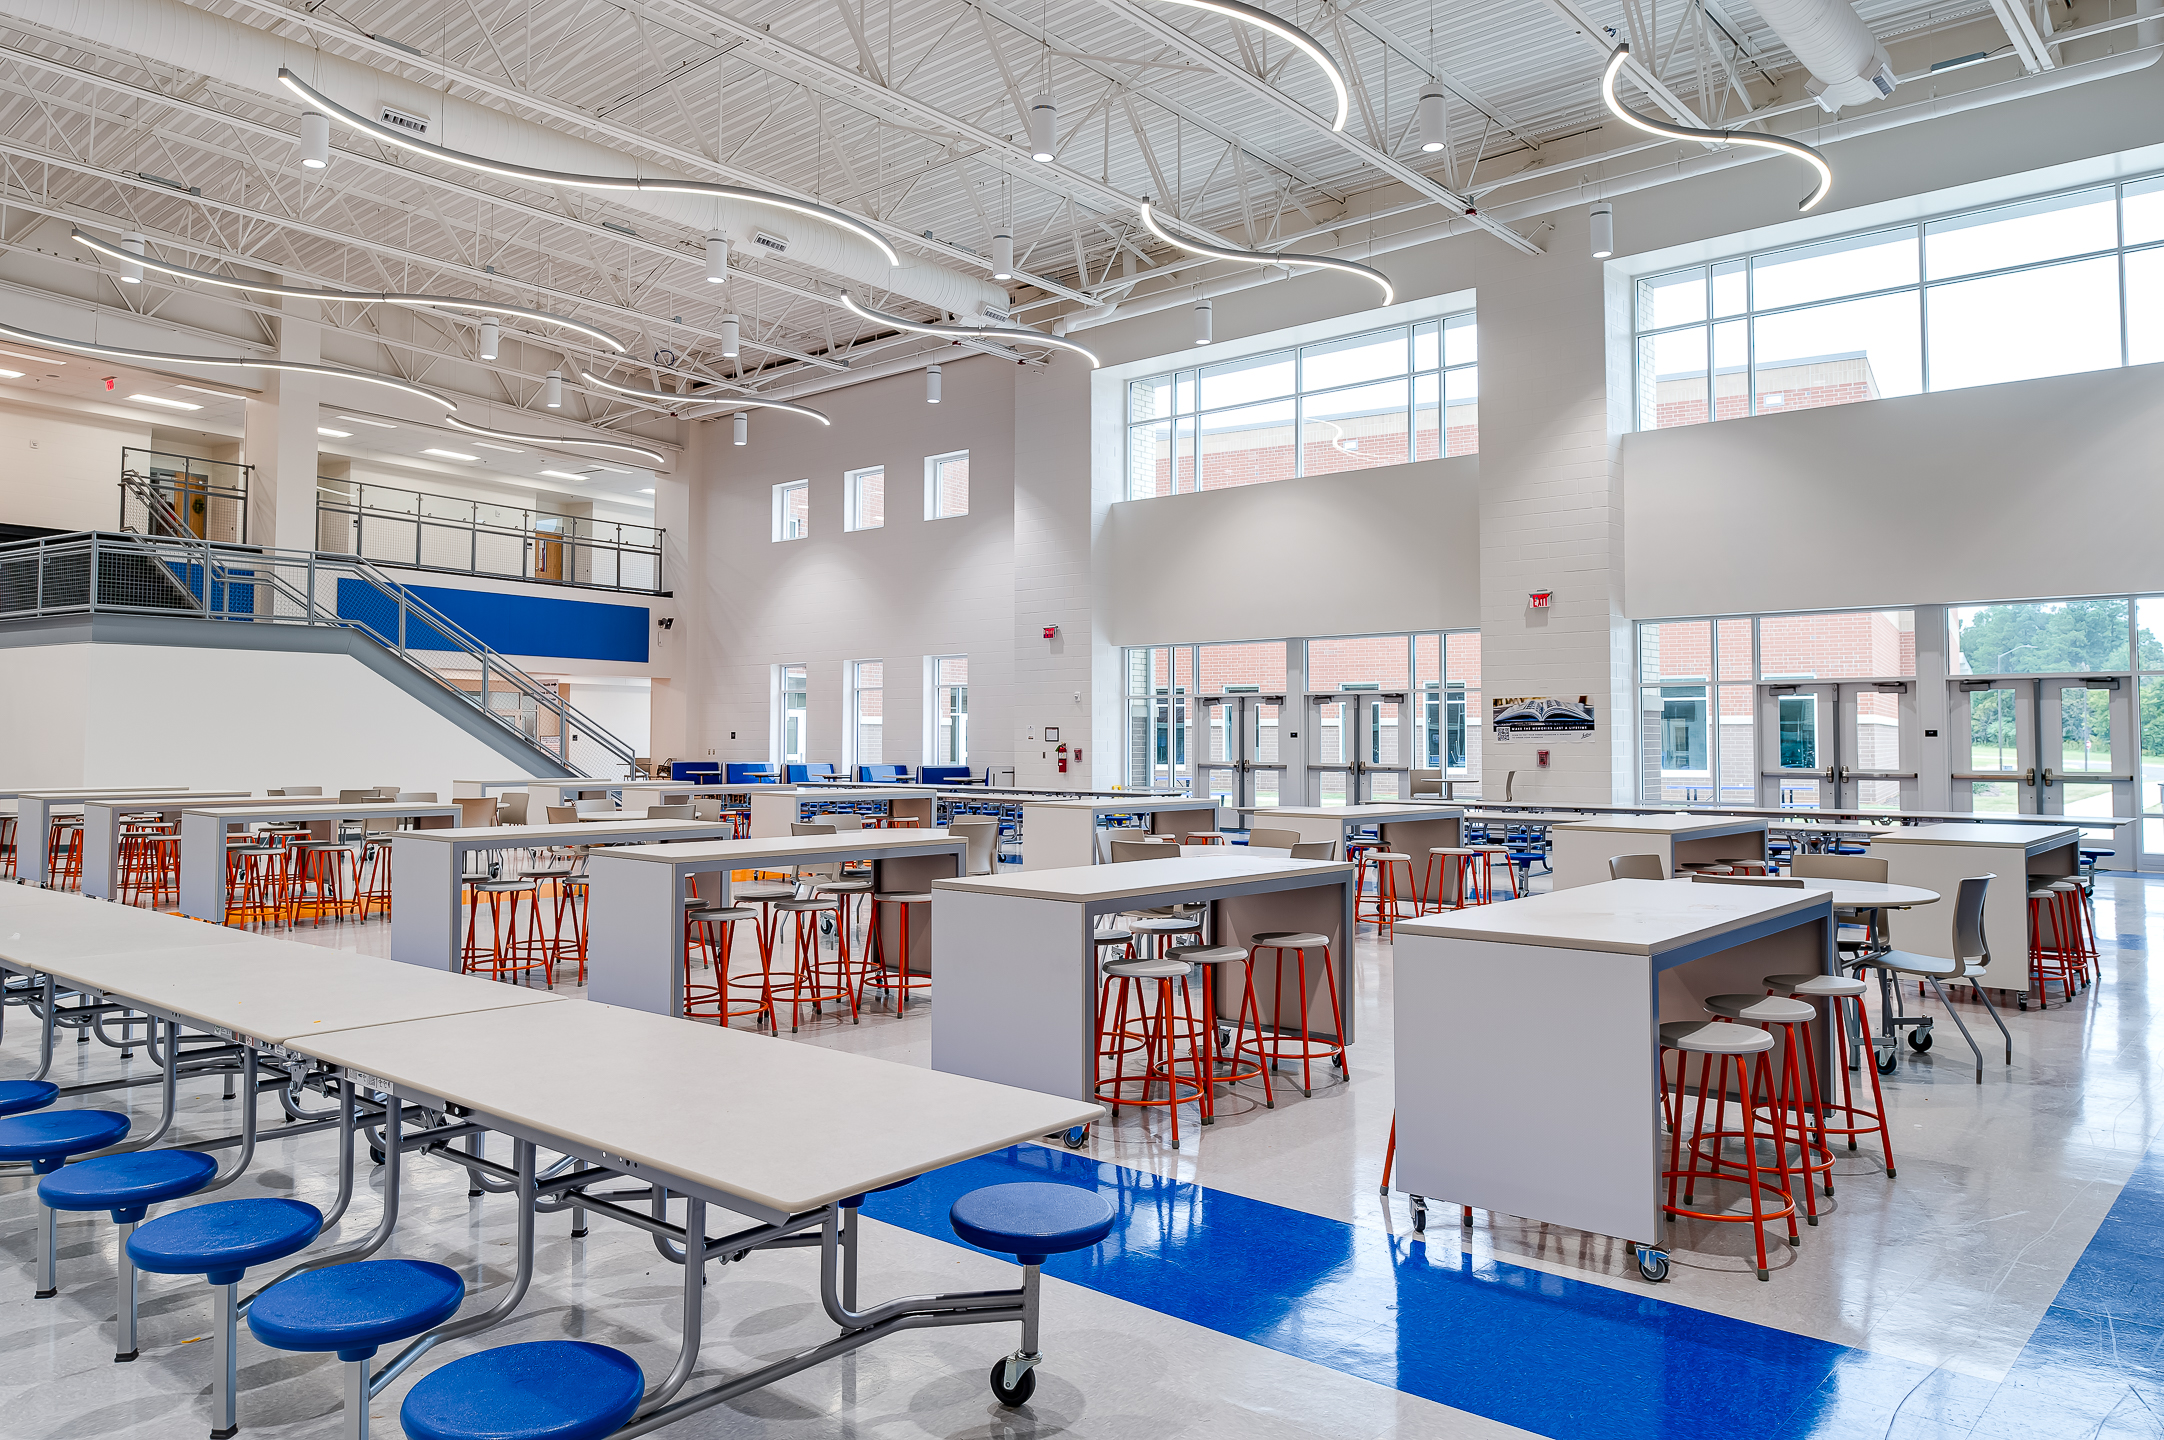 A high school cafeteria with big windows, orange stools and blue benches